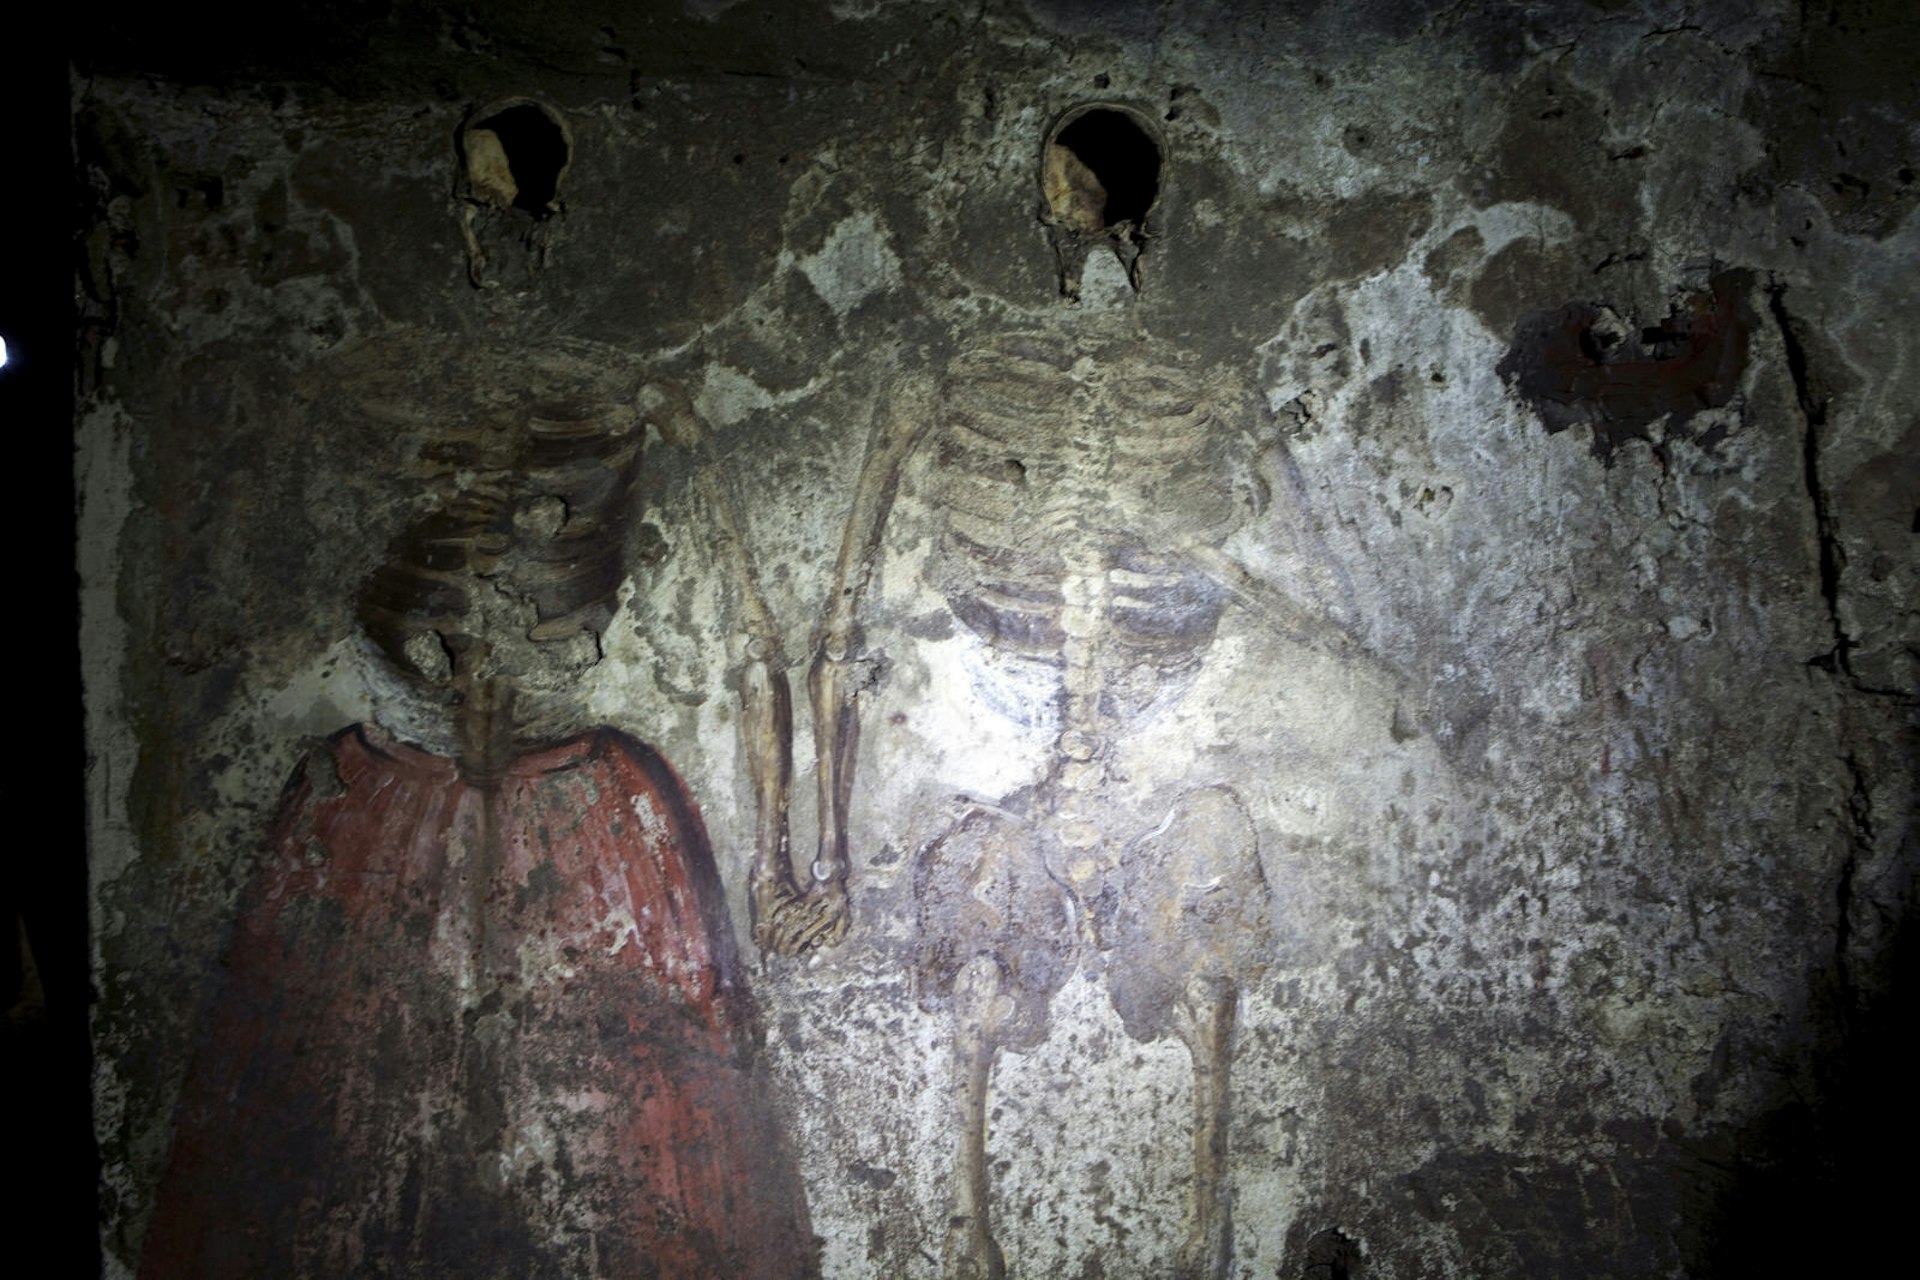 Newlyweds laid to rest in San Gaudioso Catacombs